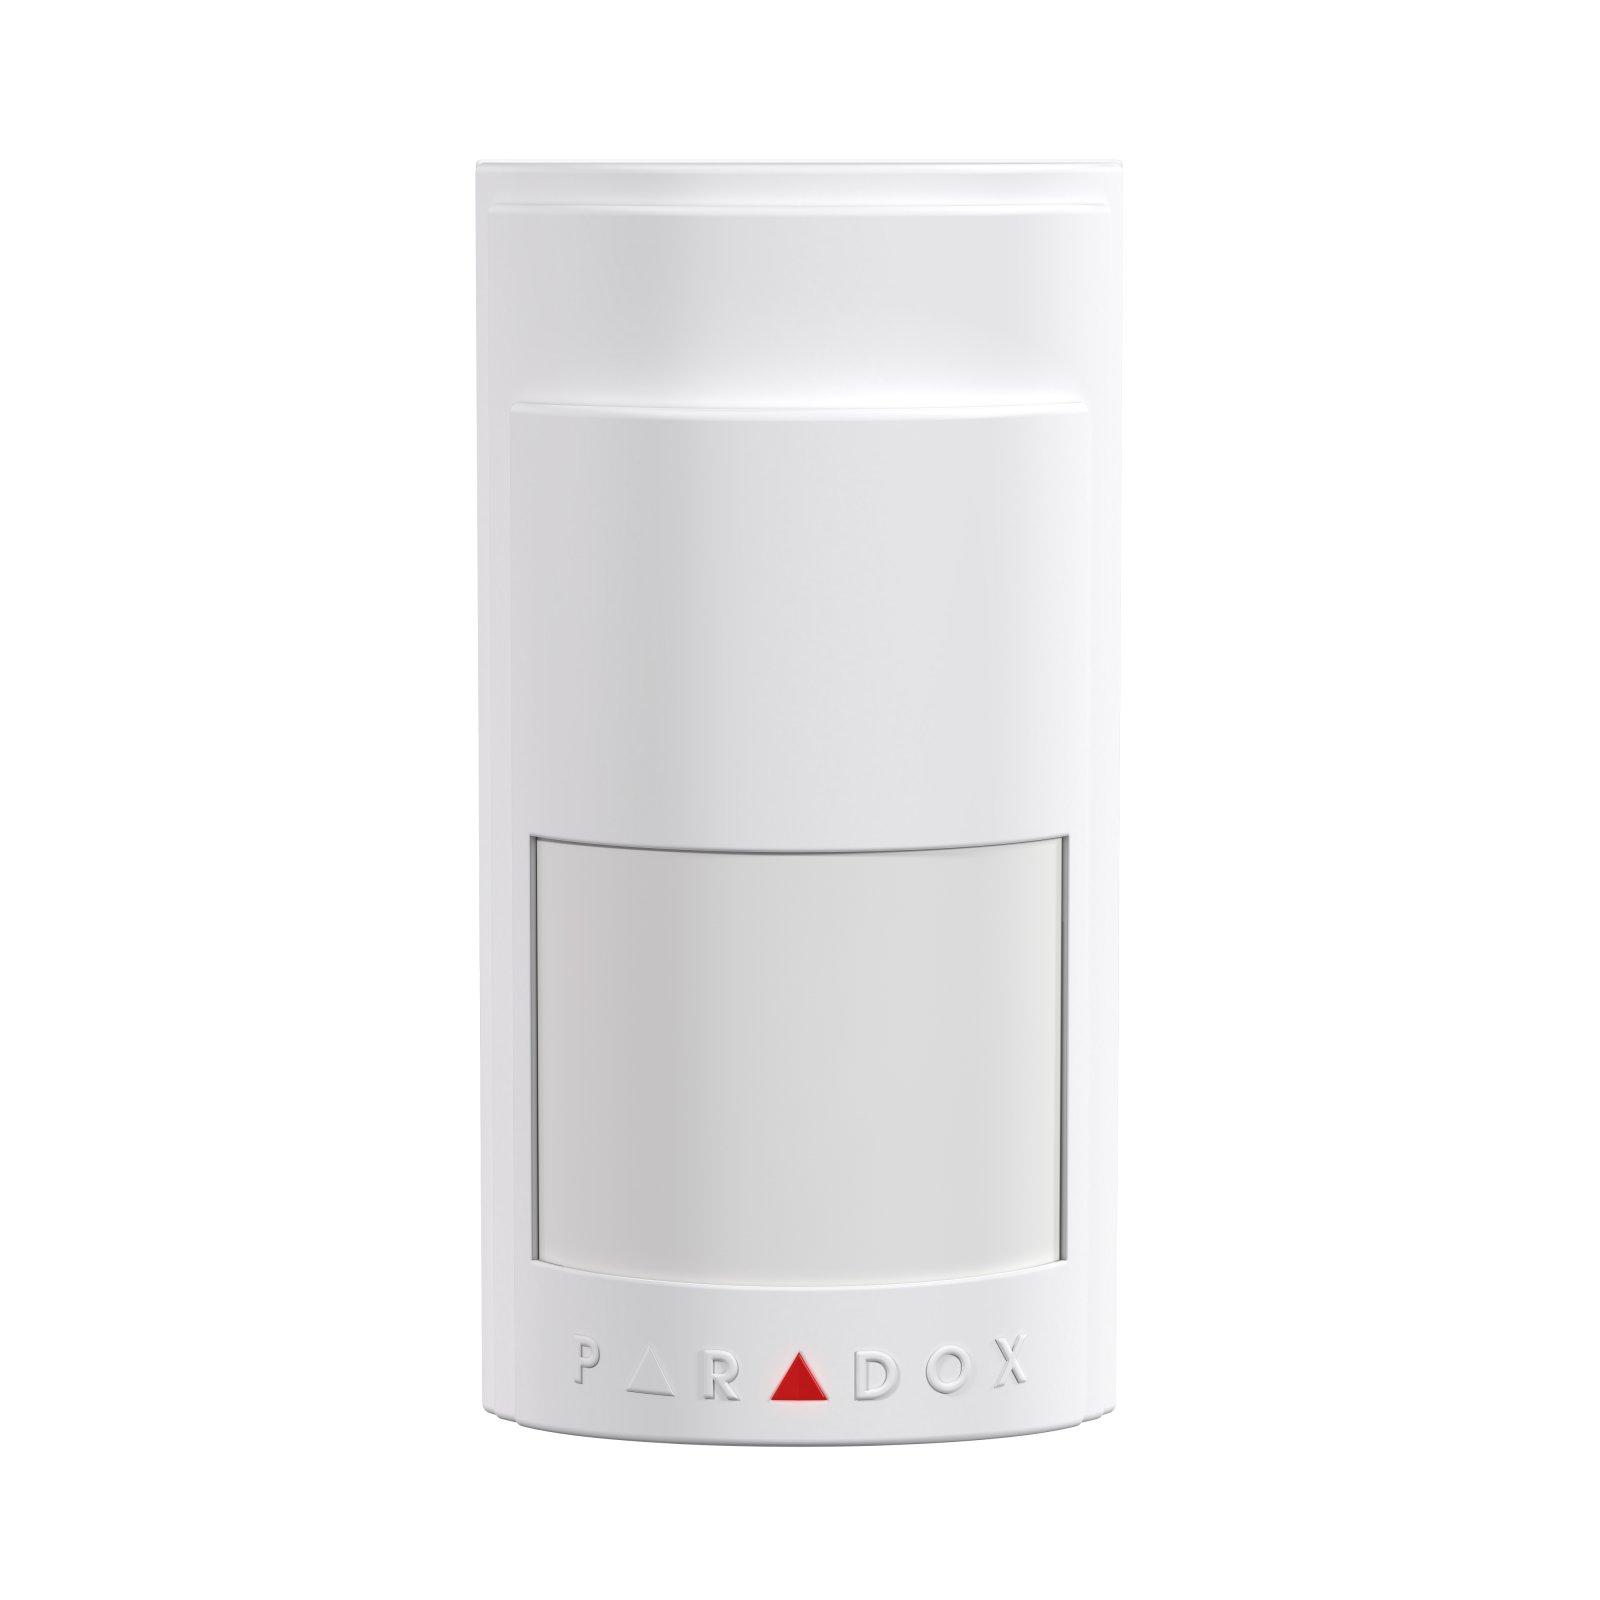 PMD2P.PARADOX Wireless PIR Motion Detector with Built-in Pet